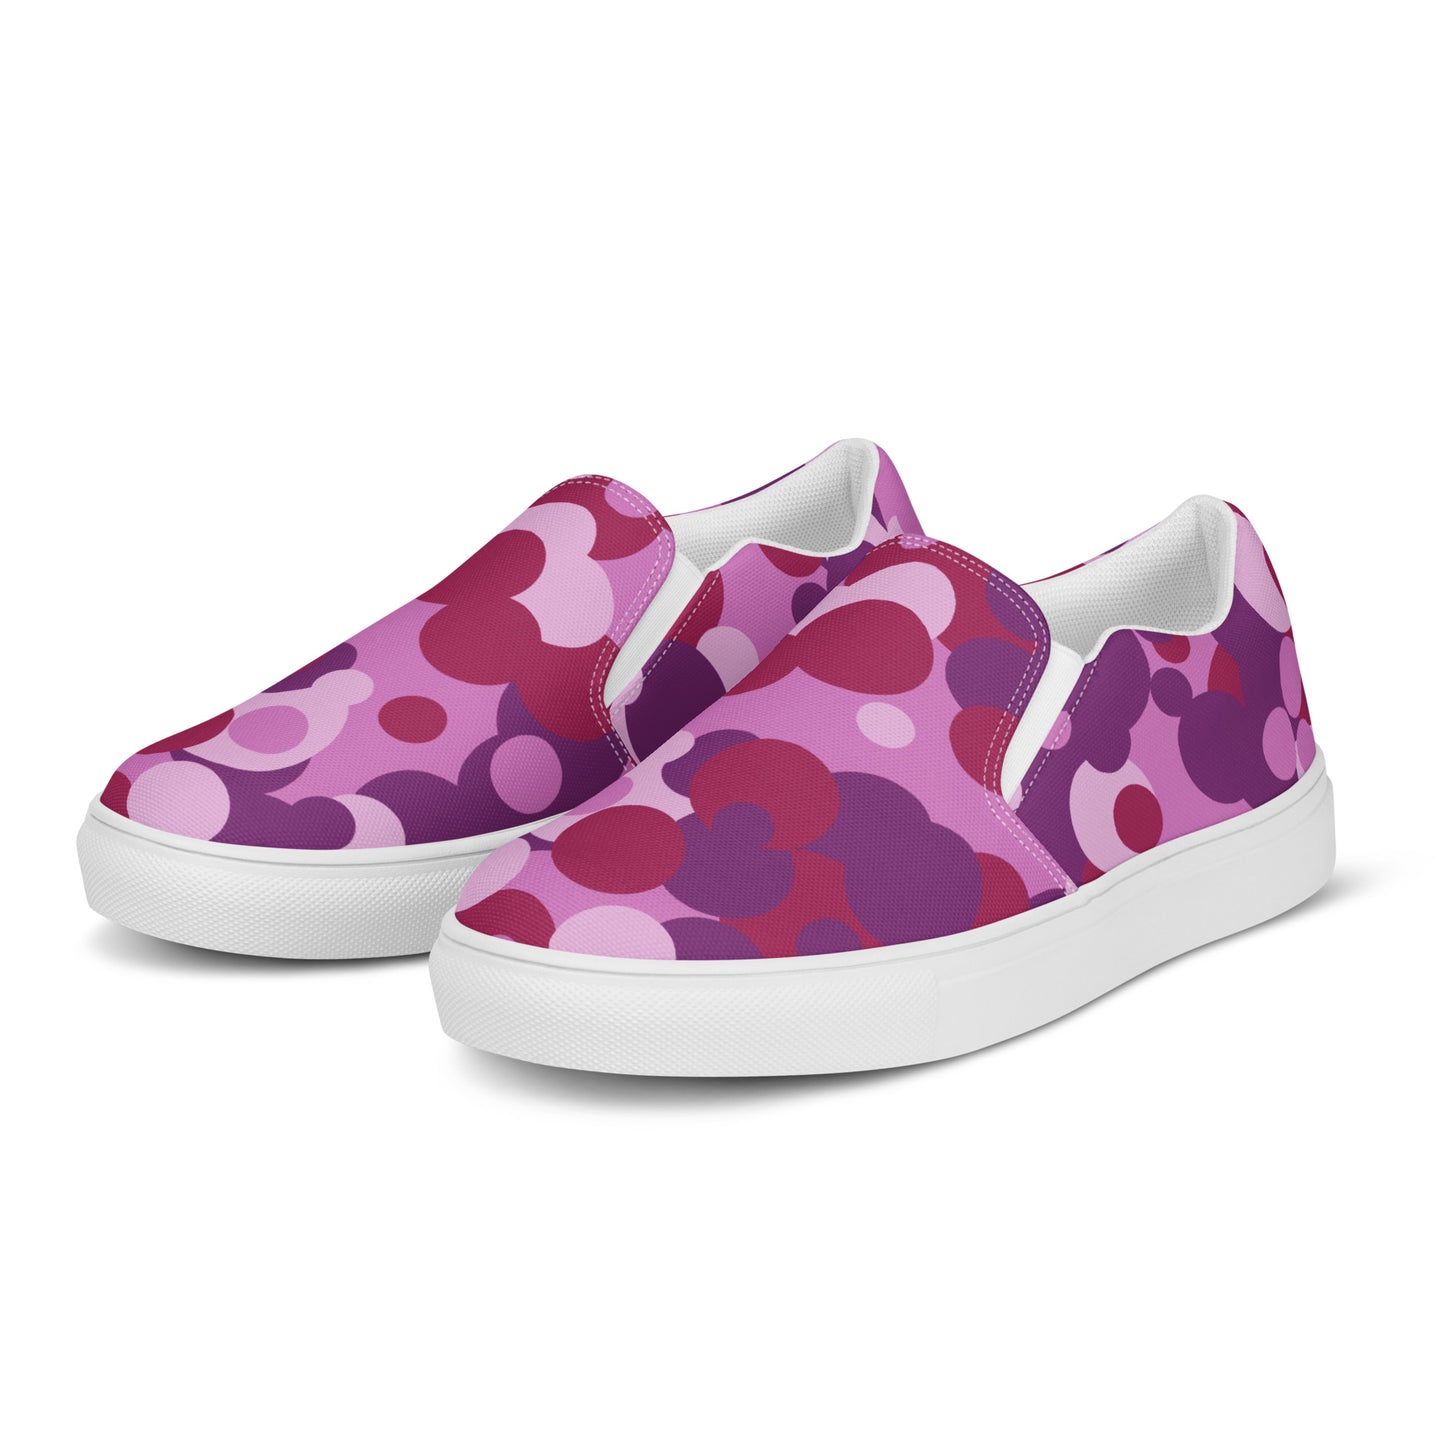 Camodot Pink | Women’s Slip-On Canvas Shoes